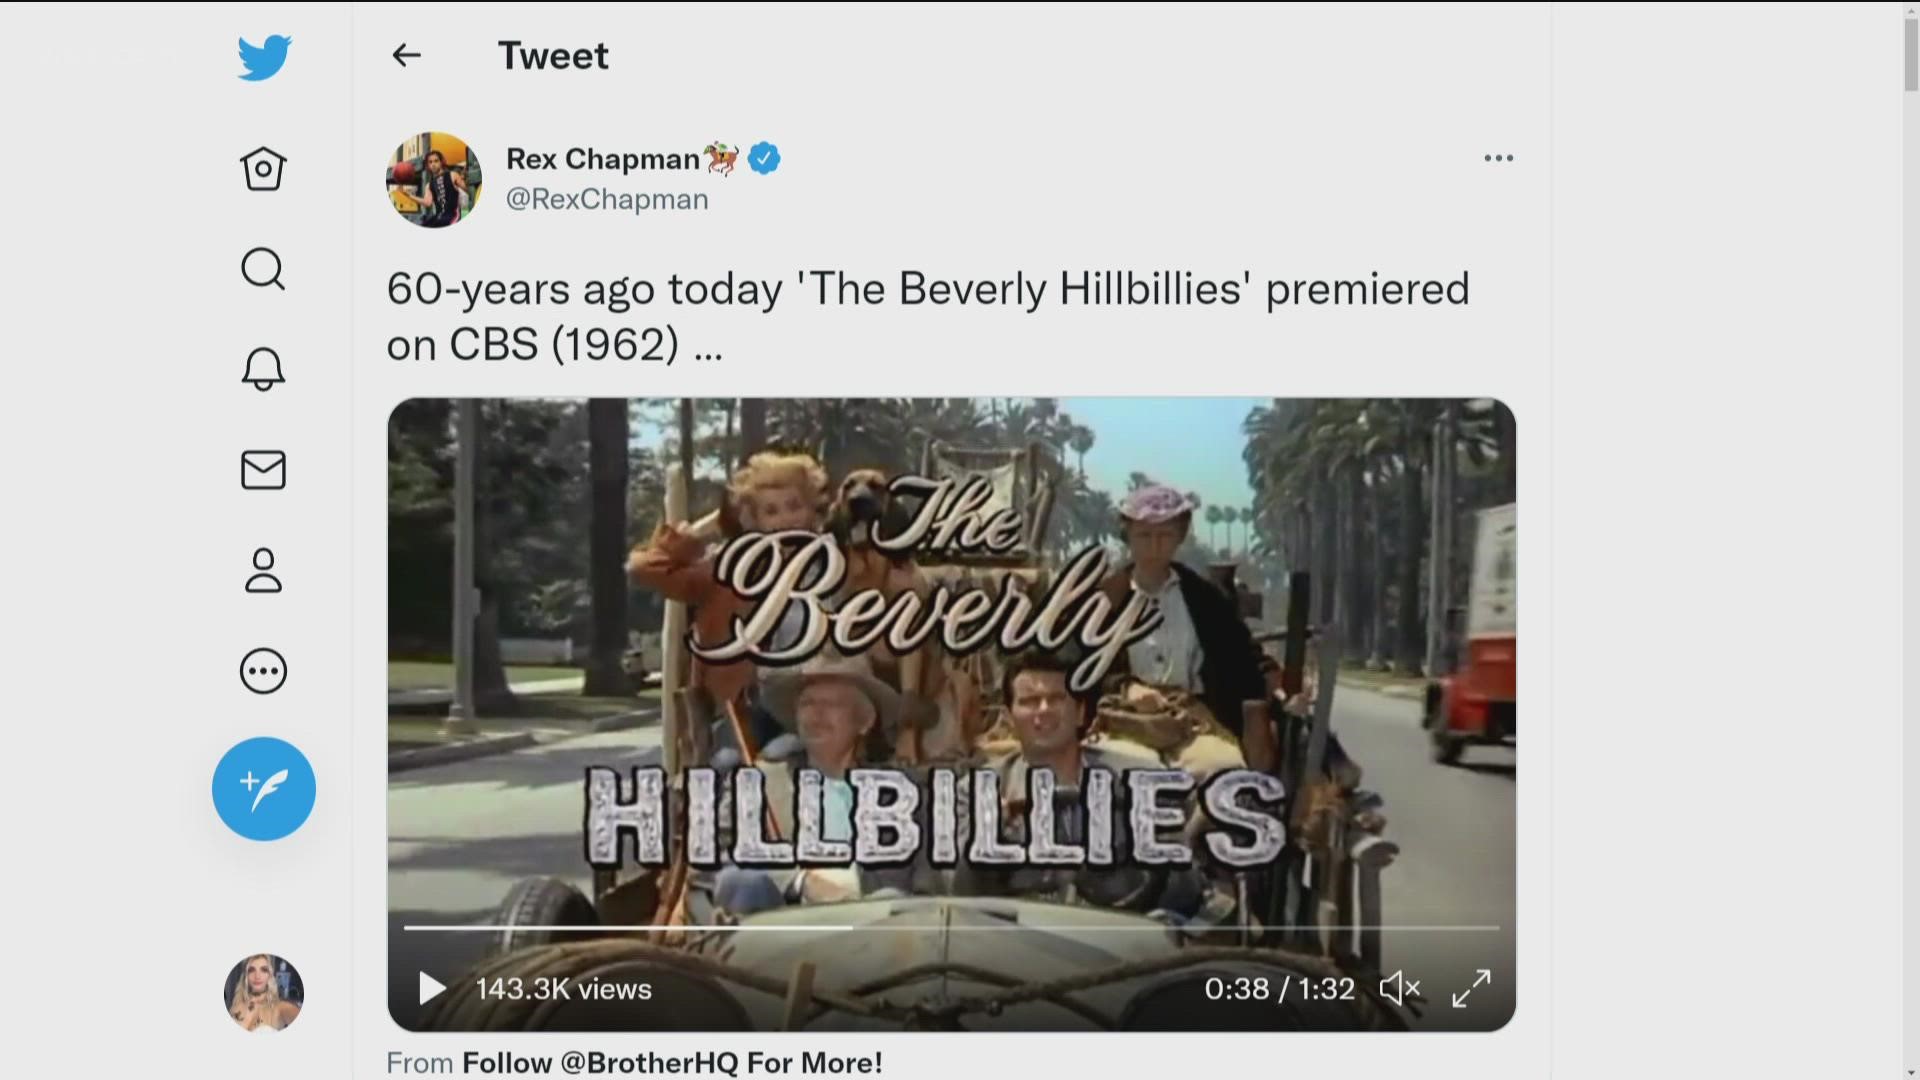 The show premiered on CBS back in 1962.